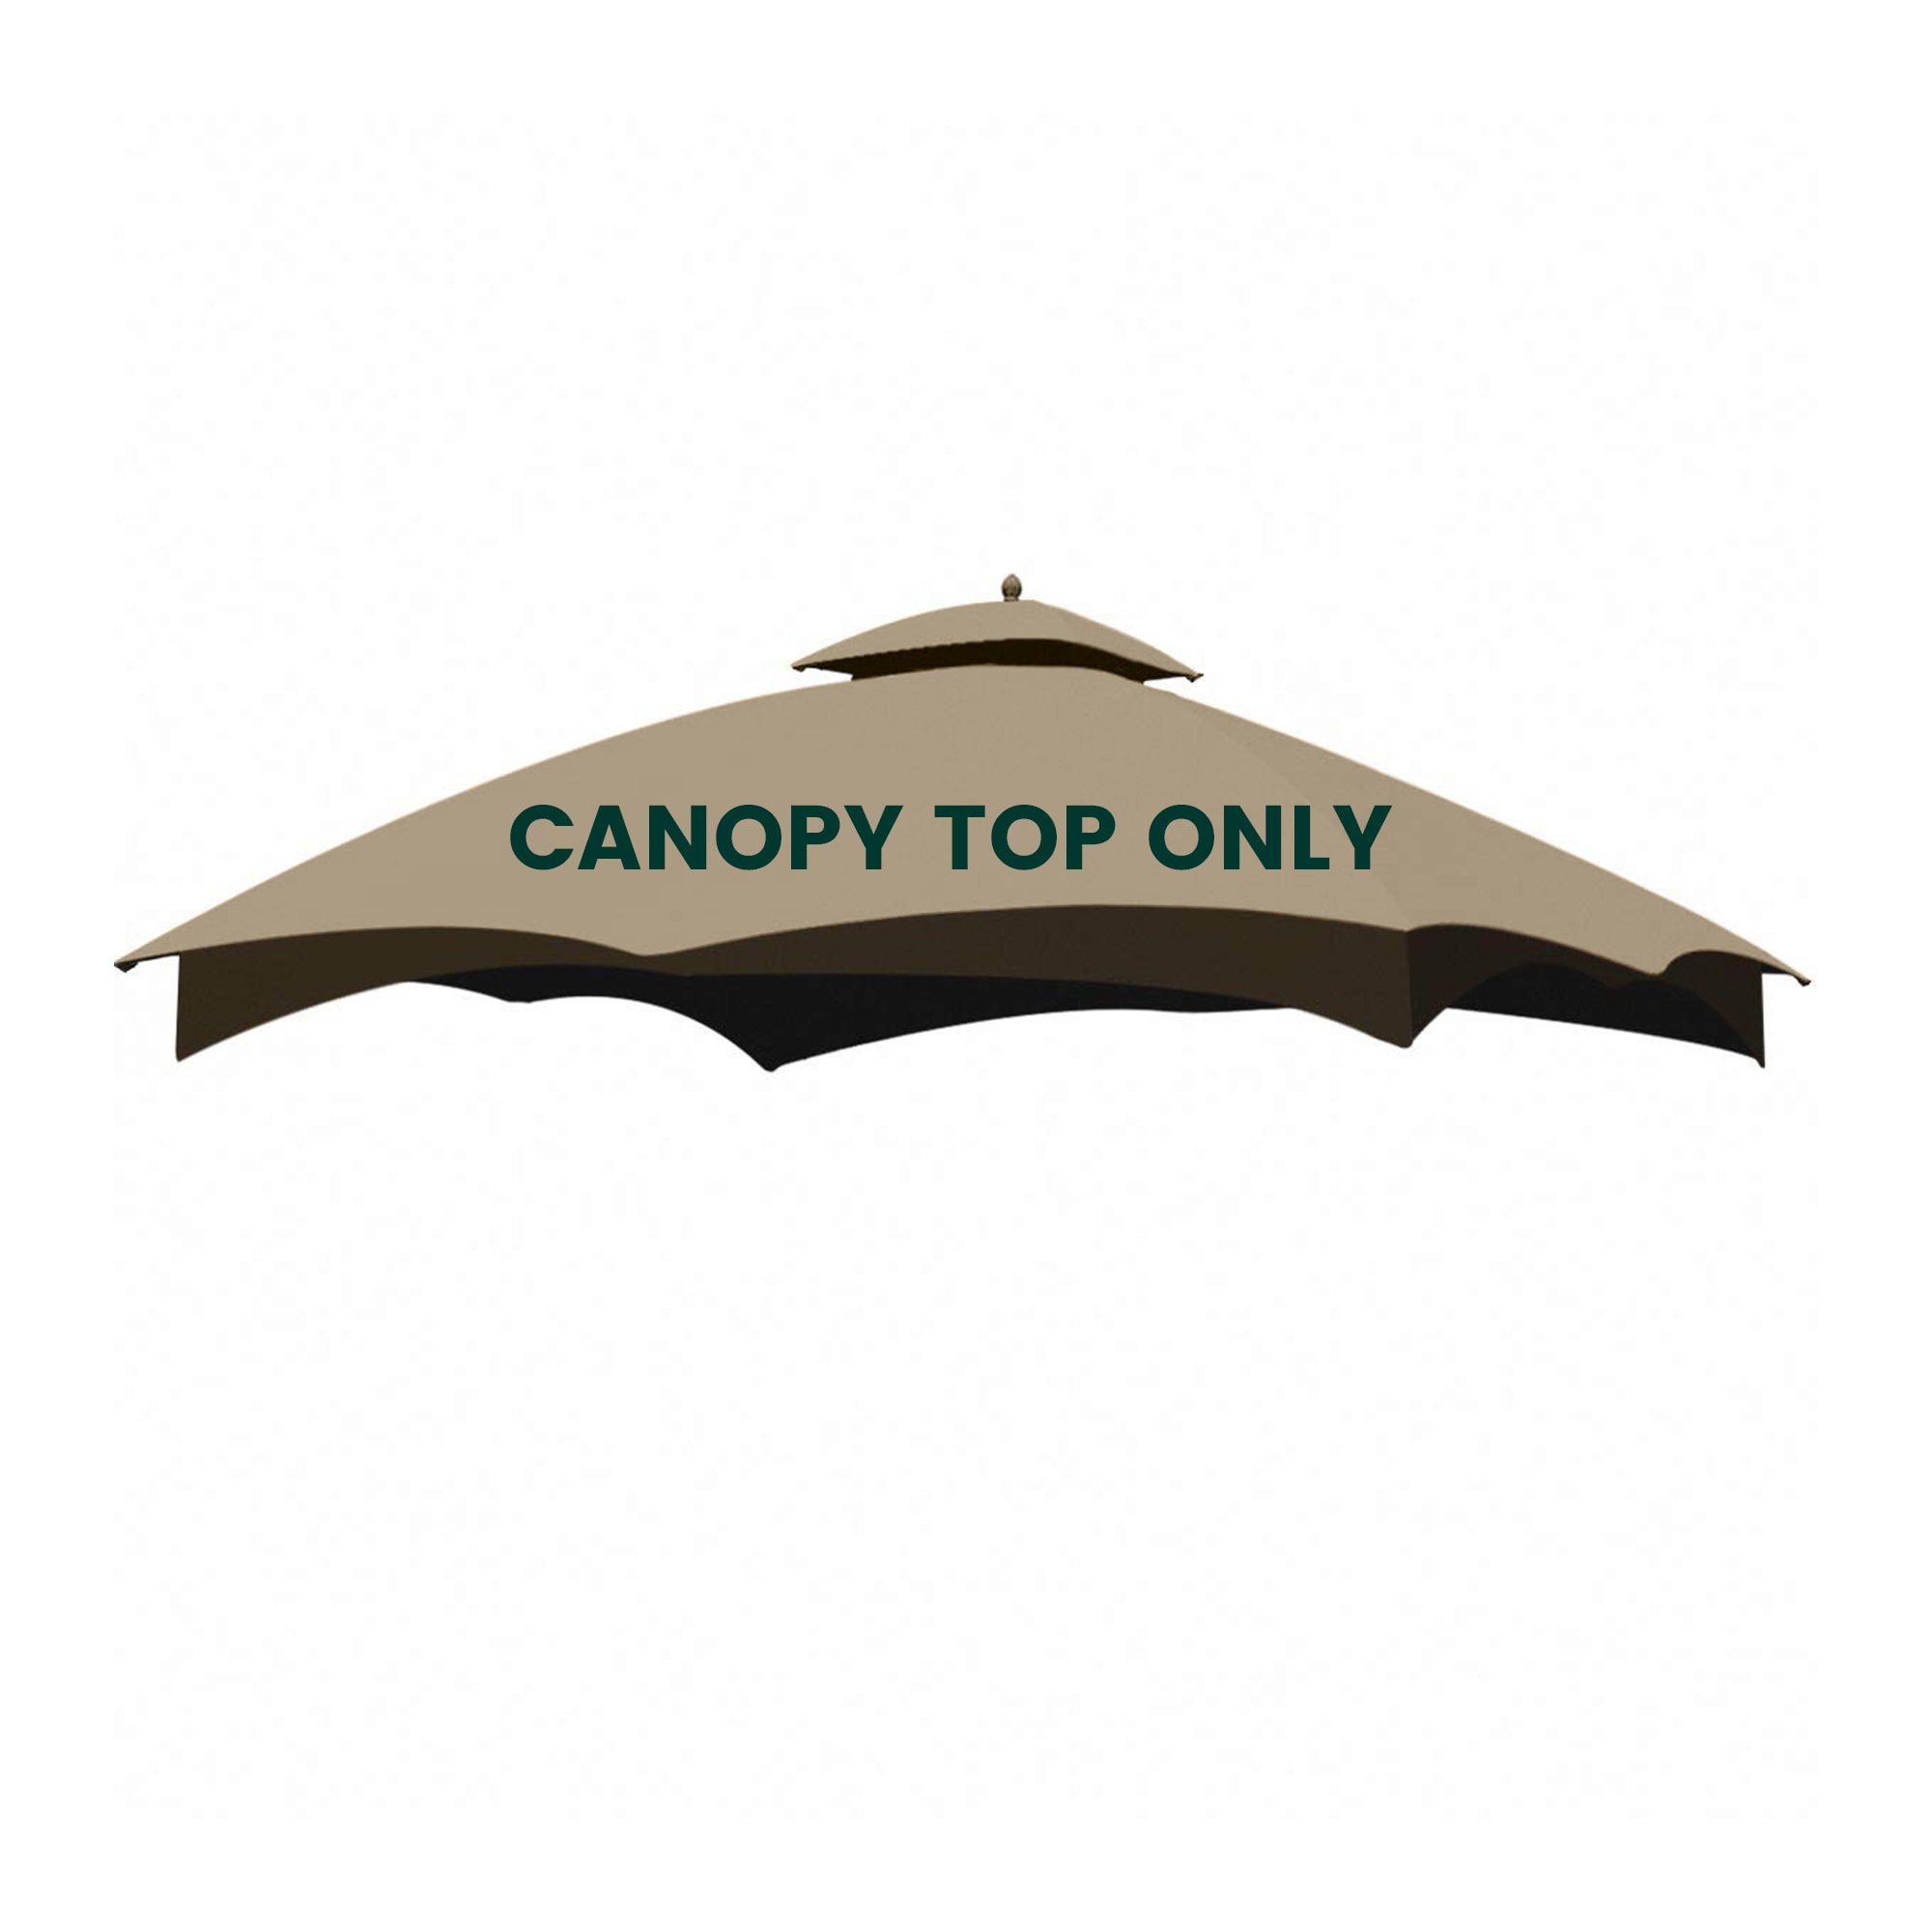 OLILAWN 10' x 12' Gazebo Replacement 2-tier Canopy Top